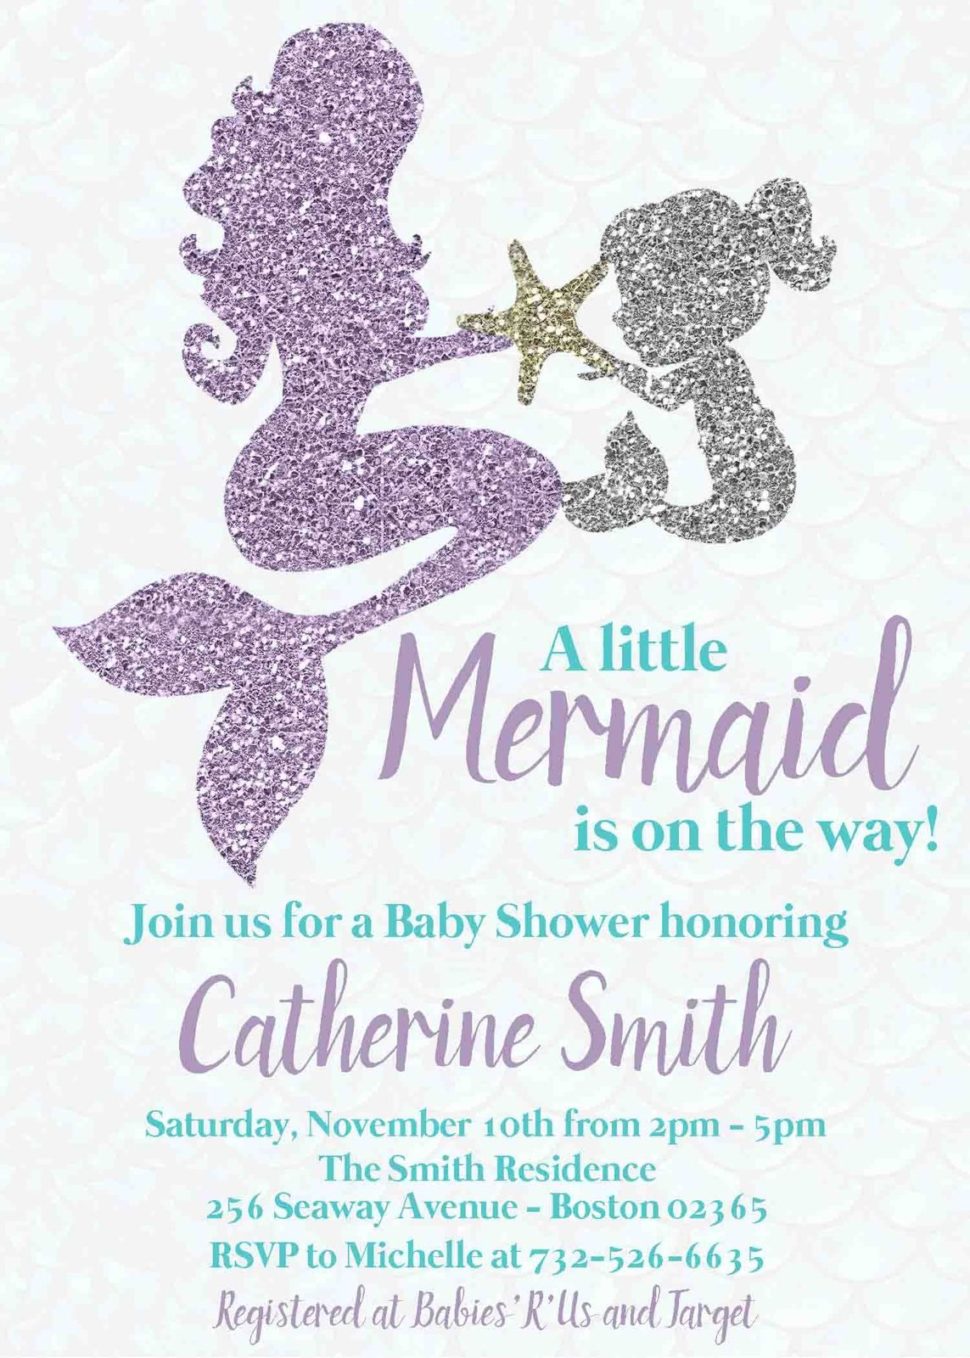 Medium Size of Baby Shower:cheap Invitations Baby Shower Homemade Baby Shower Decorations Baby Shower Centerpiece Ideas For Boys Homemade Baby Shower Centerpieces Elegant Baby Shower Nursery For Girls Baby Shower Ideas Baby Shower Invitations For Boys